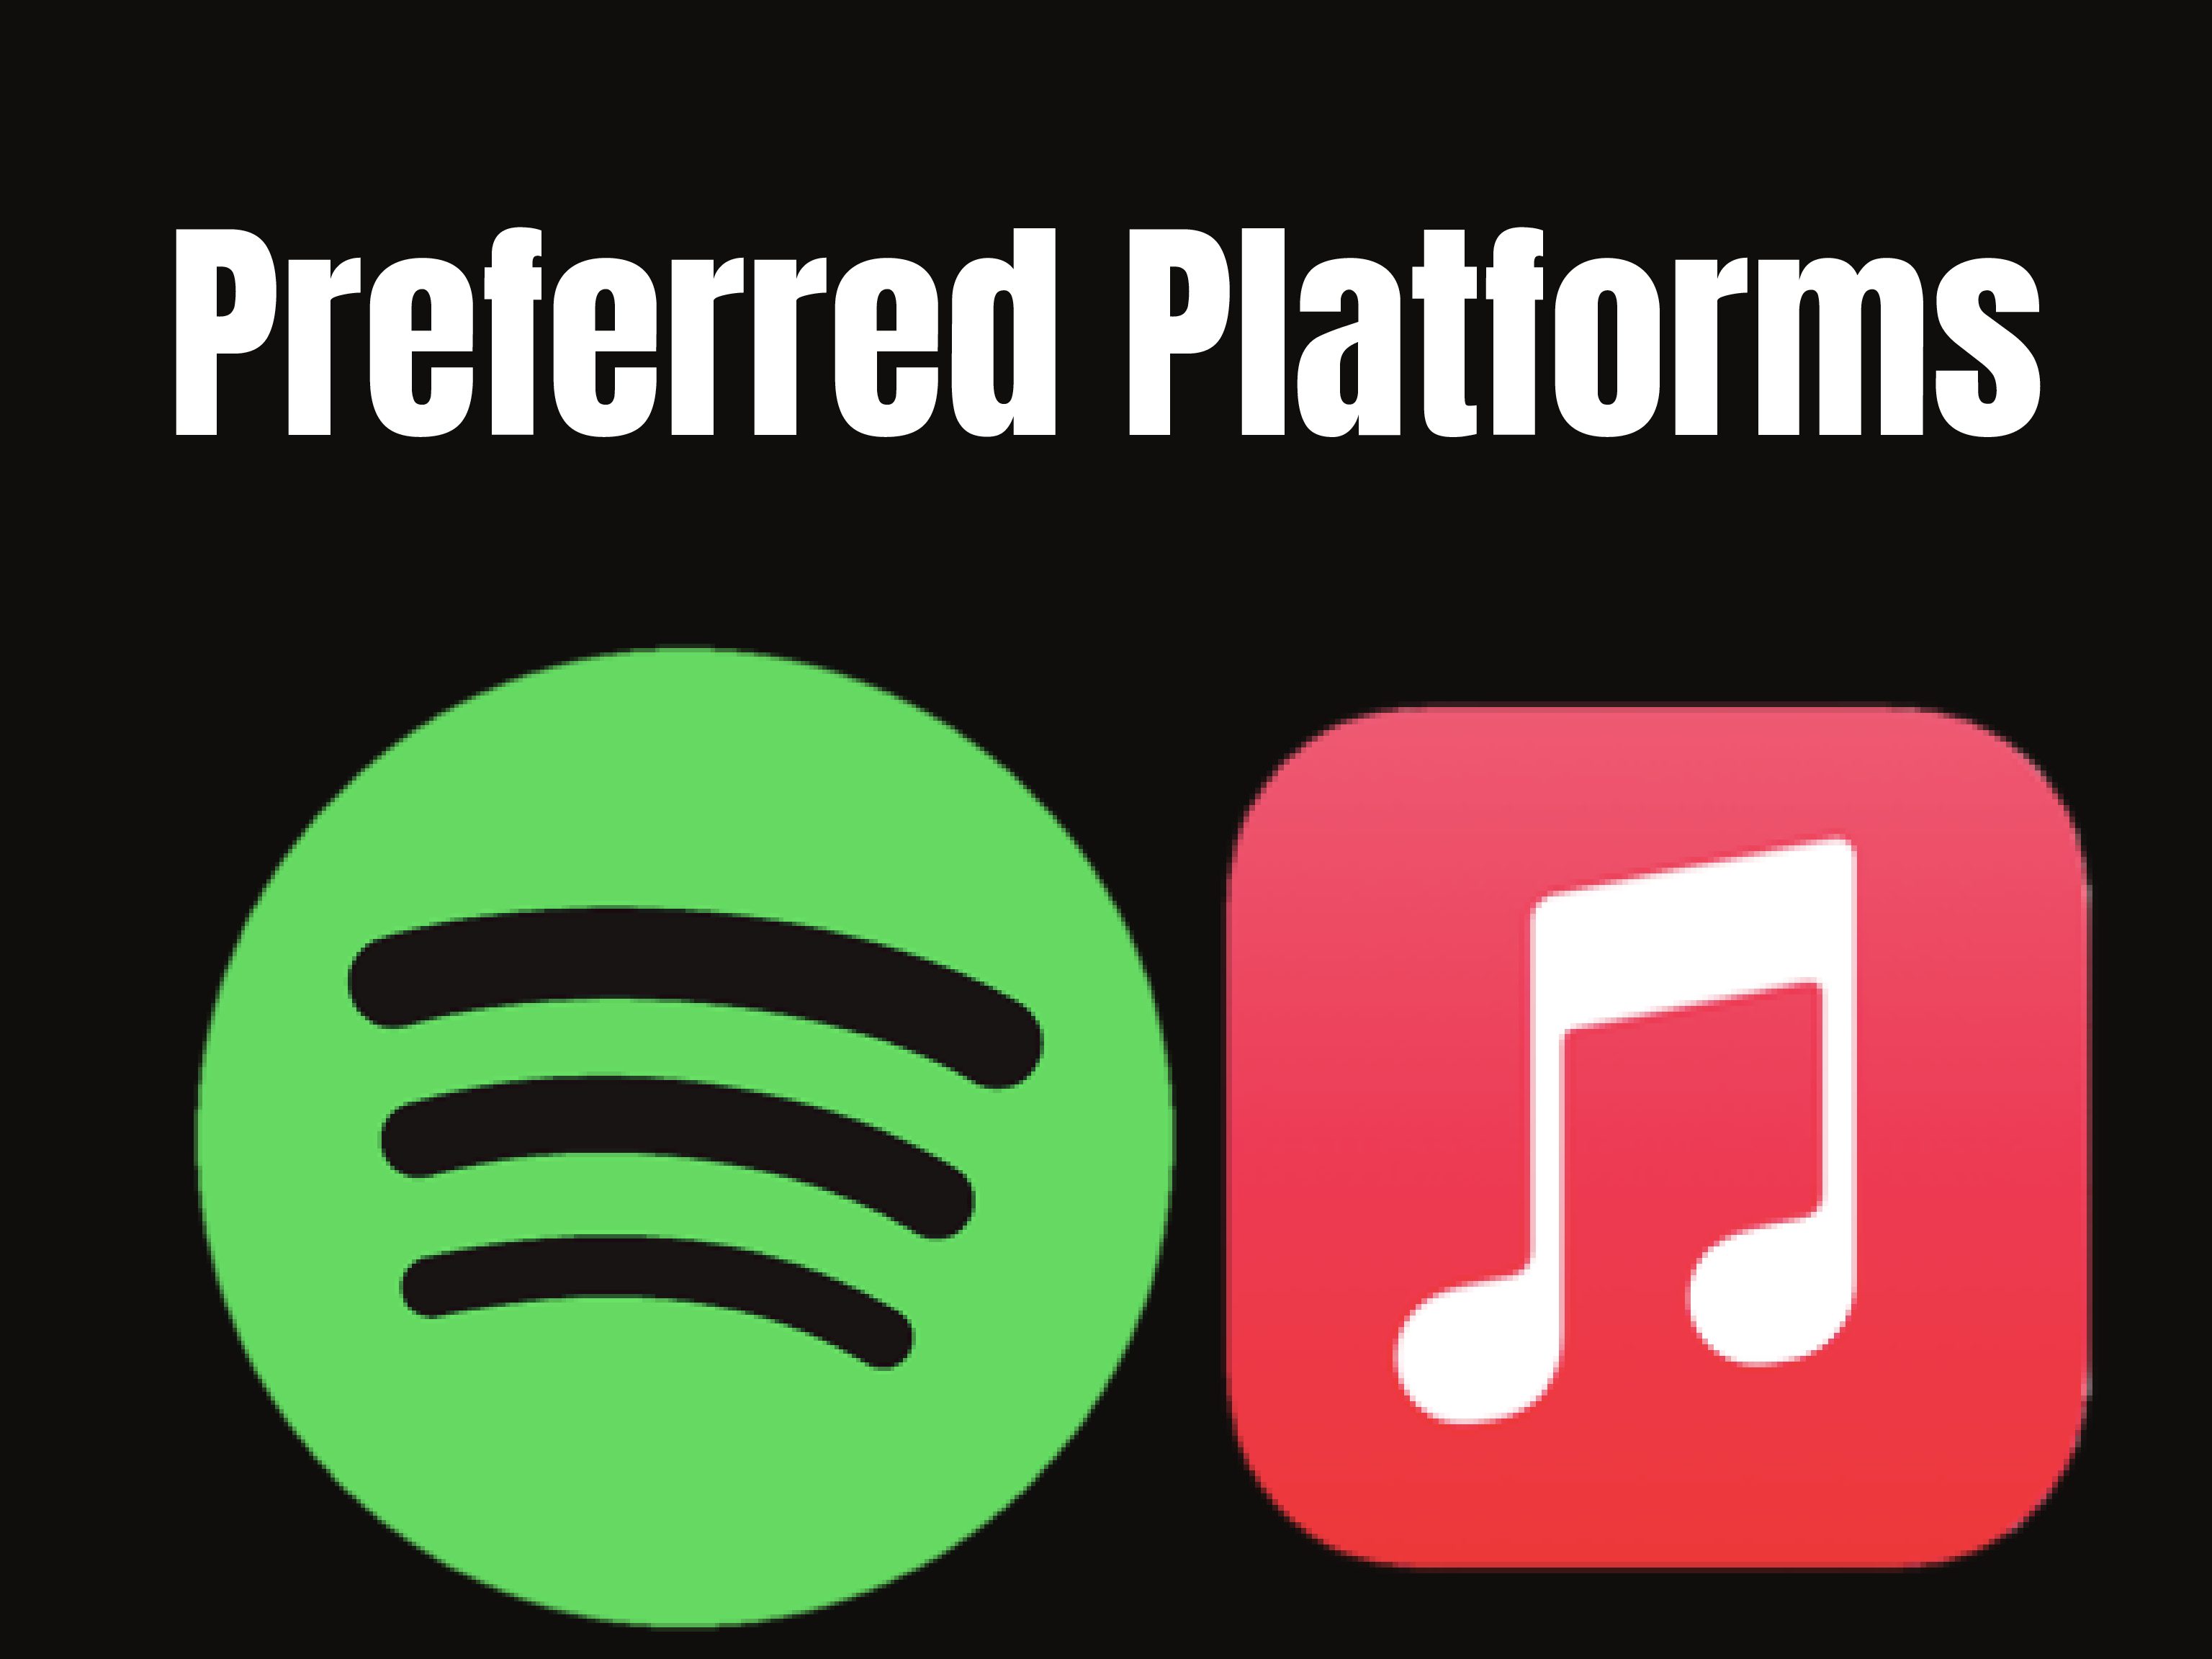 Opinion: Spotify is a better music platform over Apple Music